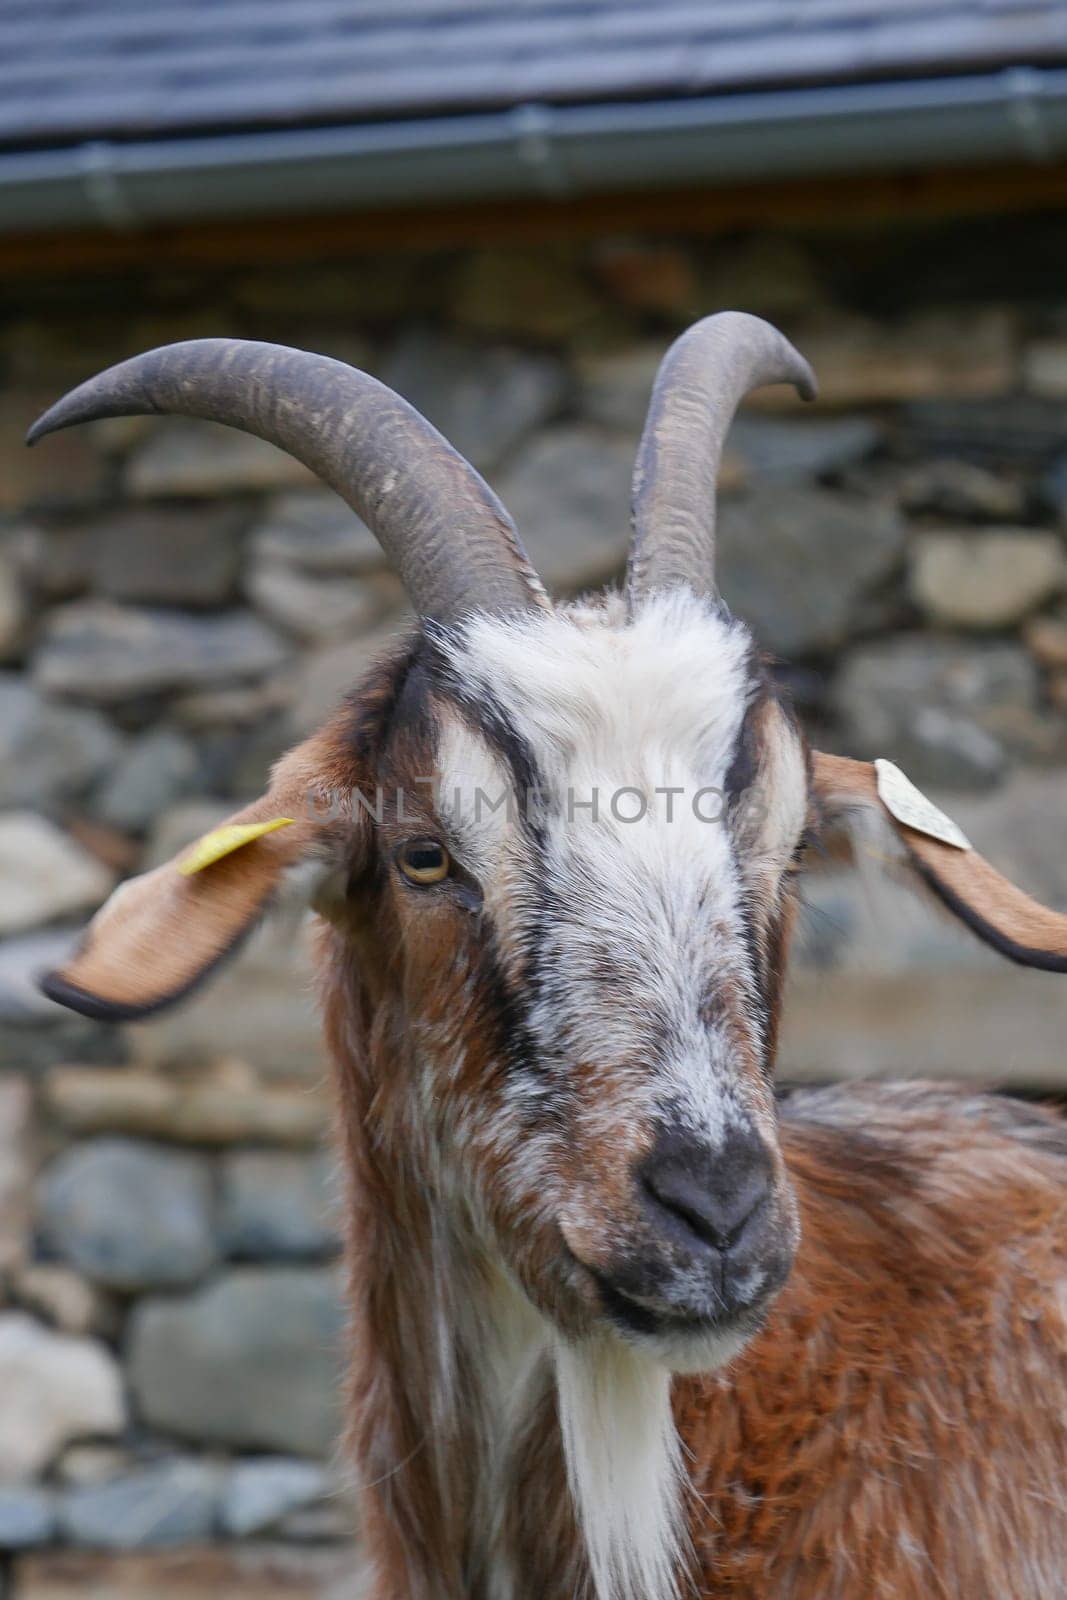 Pyrenean goat, a breed to produce organic French Basque country goat cheese by FreeProd